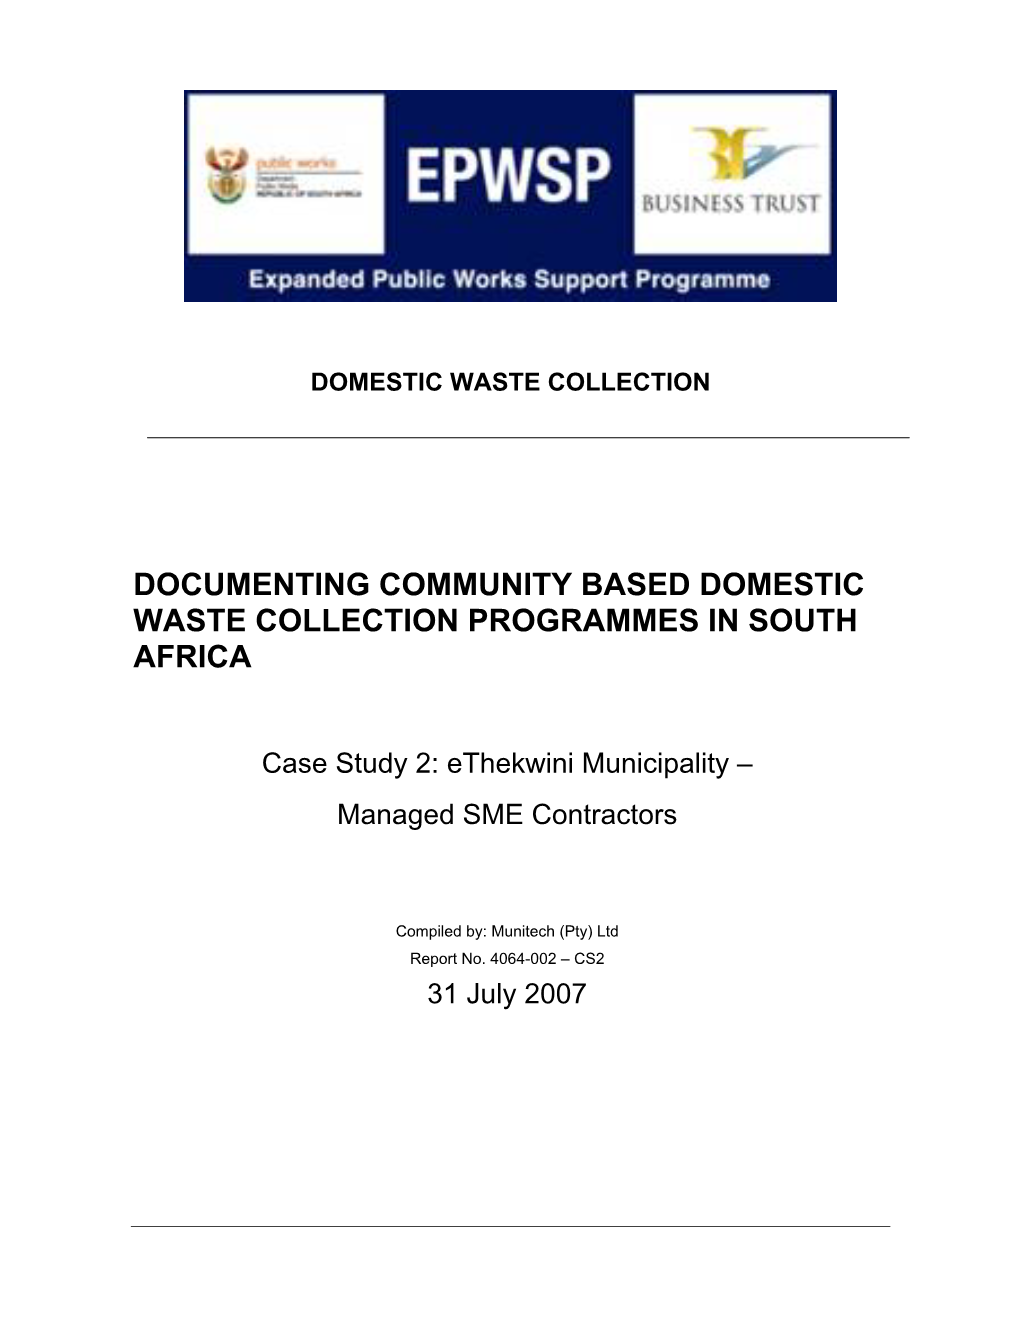 Documenting Community Based Domestic Waste Collection Programmes in South Africa